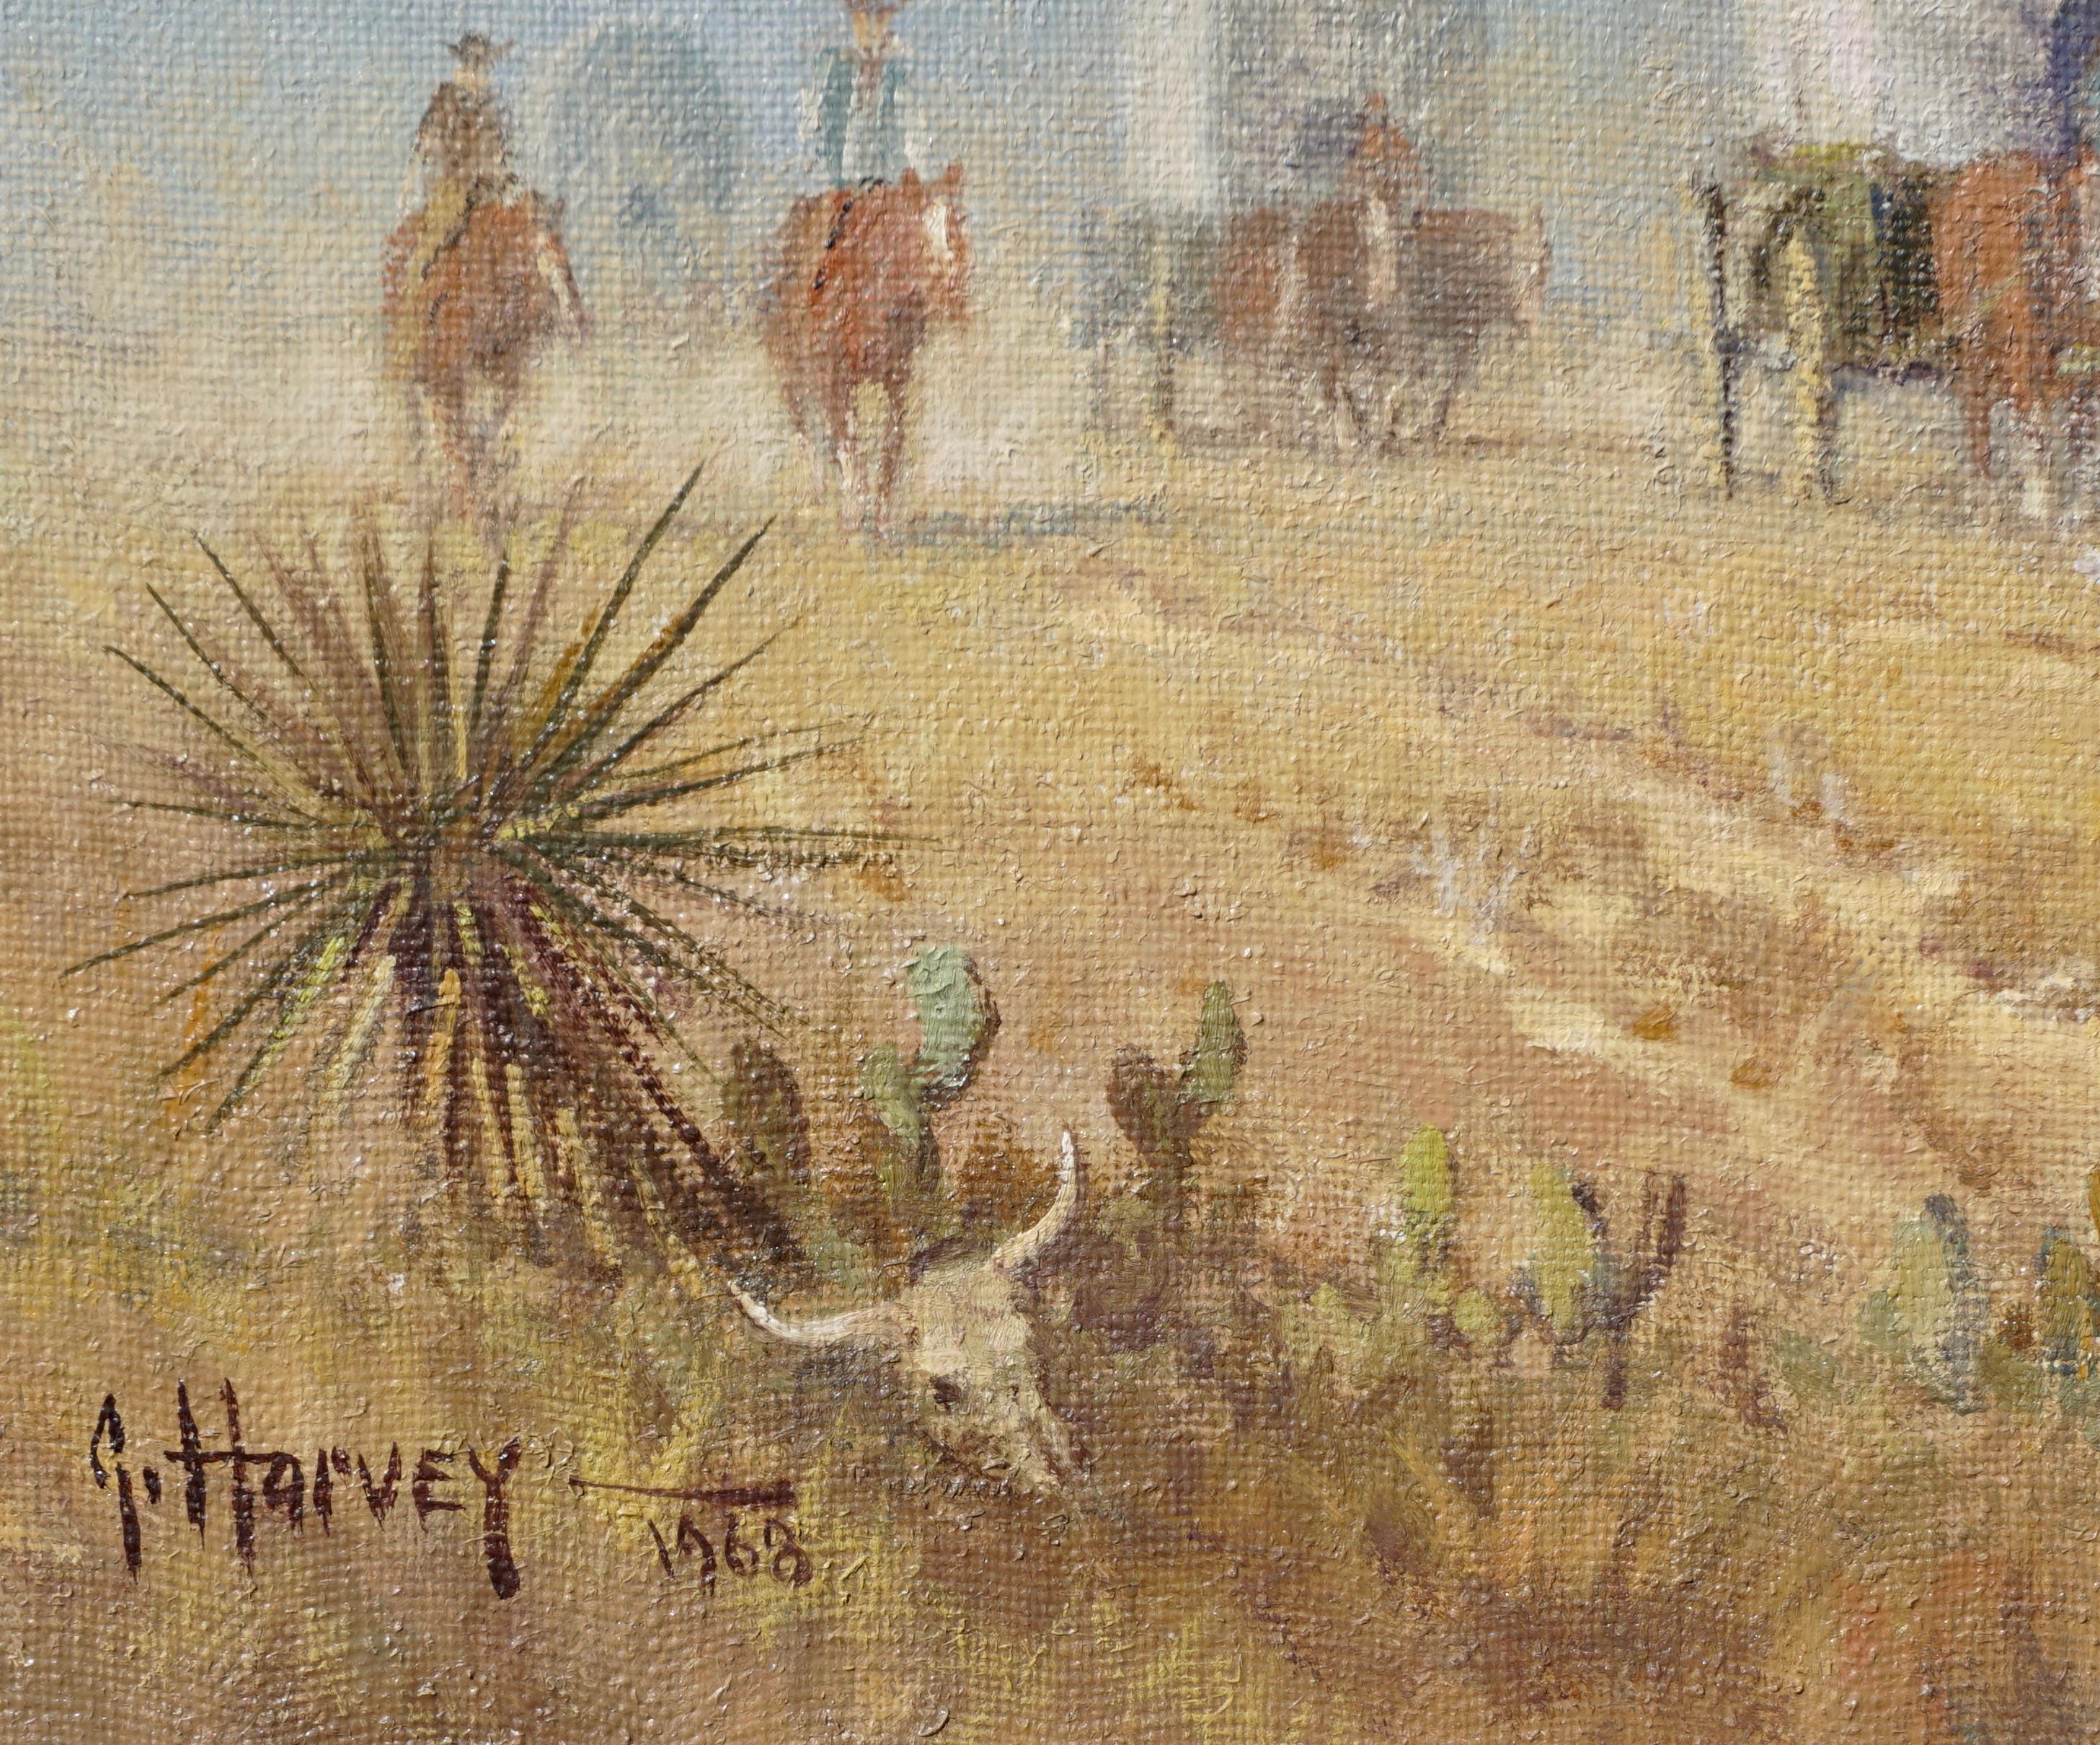 Hand-Painted G. Harvey Cowboys “Crossing the Texas Plains”  Early Painting 1968